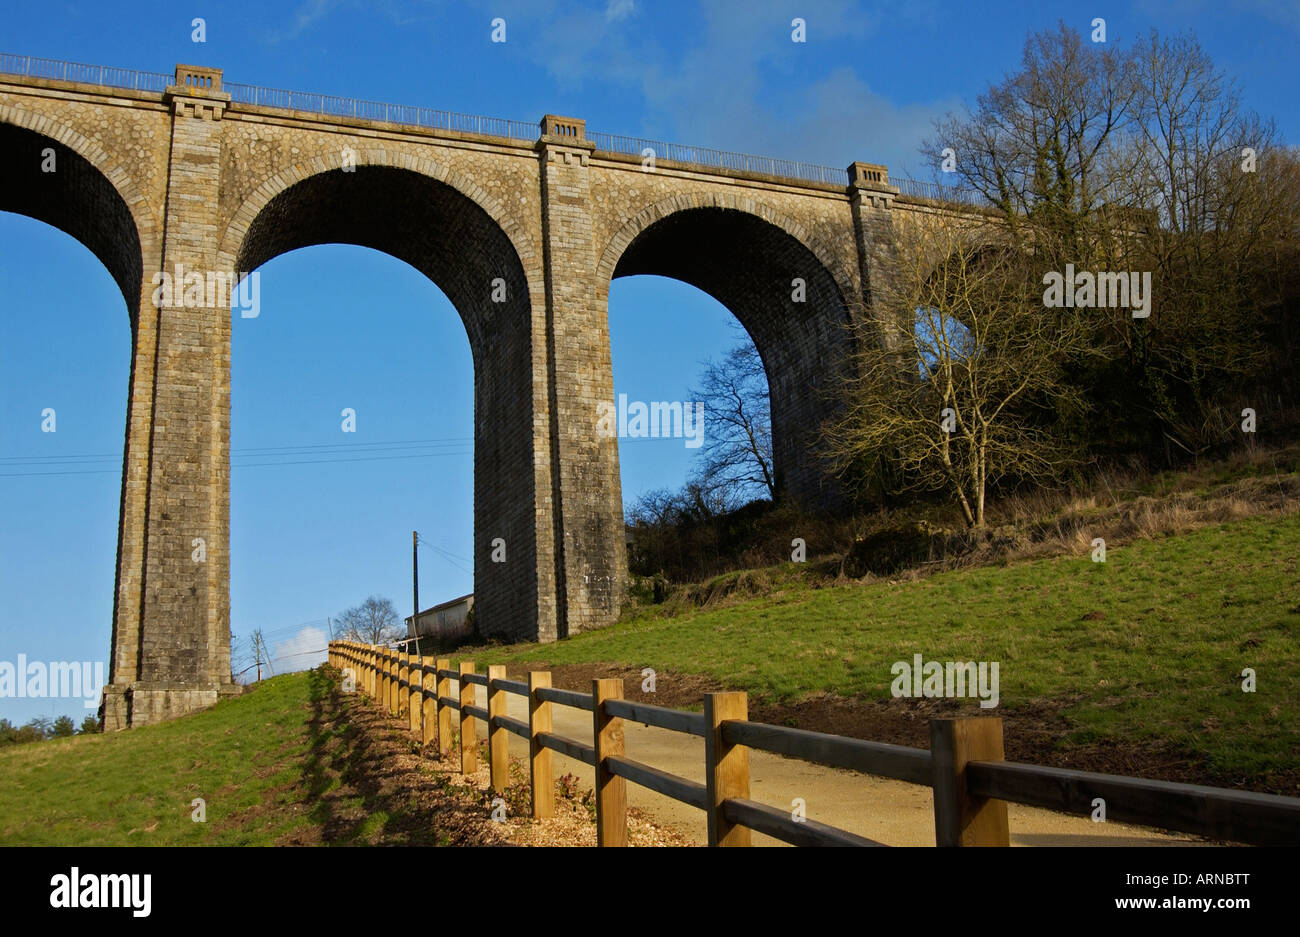 Railway viaduct in Parthenay, France Stock Photo